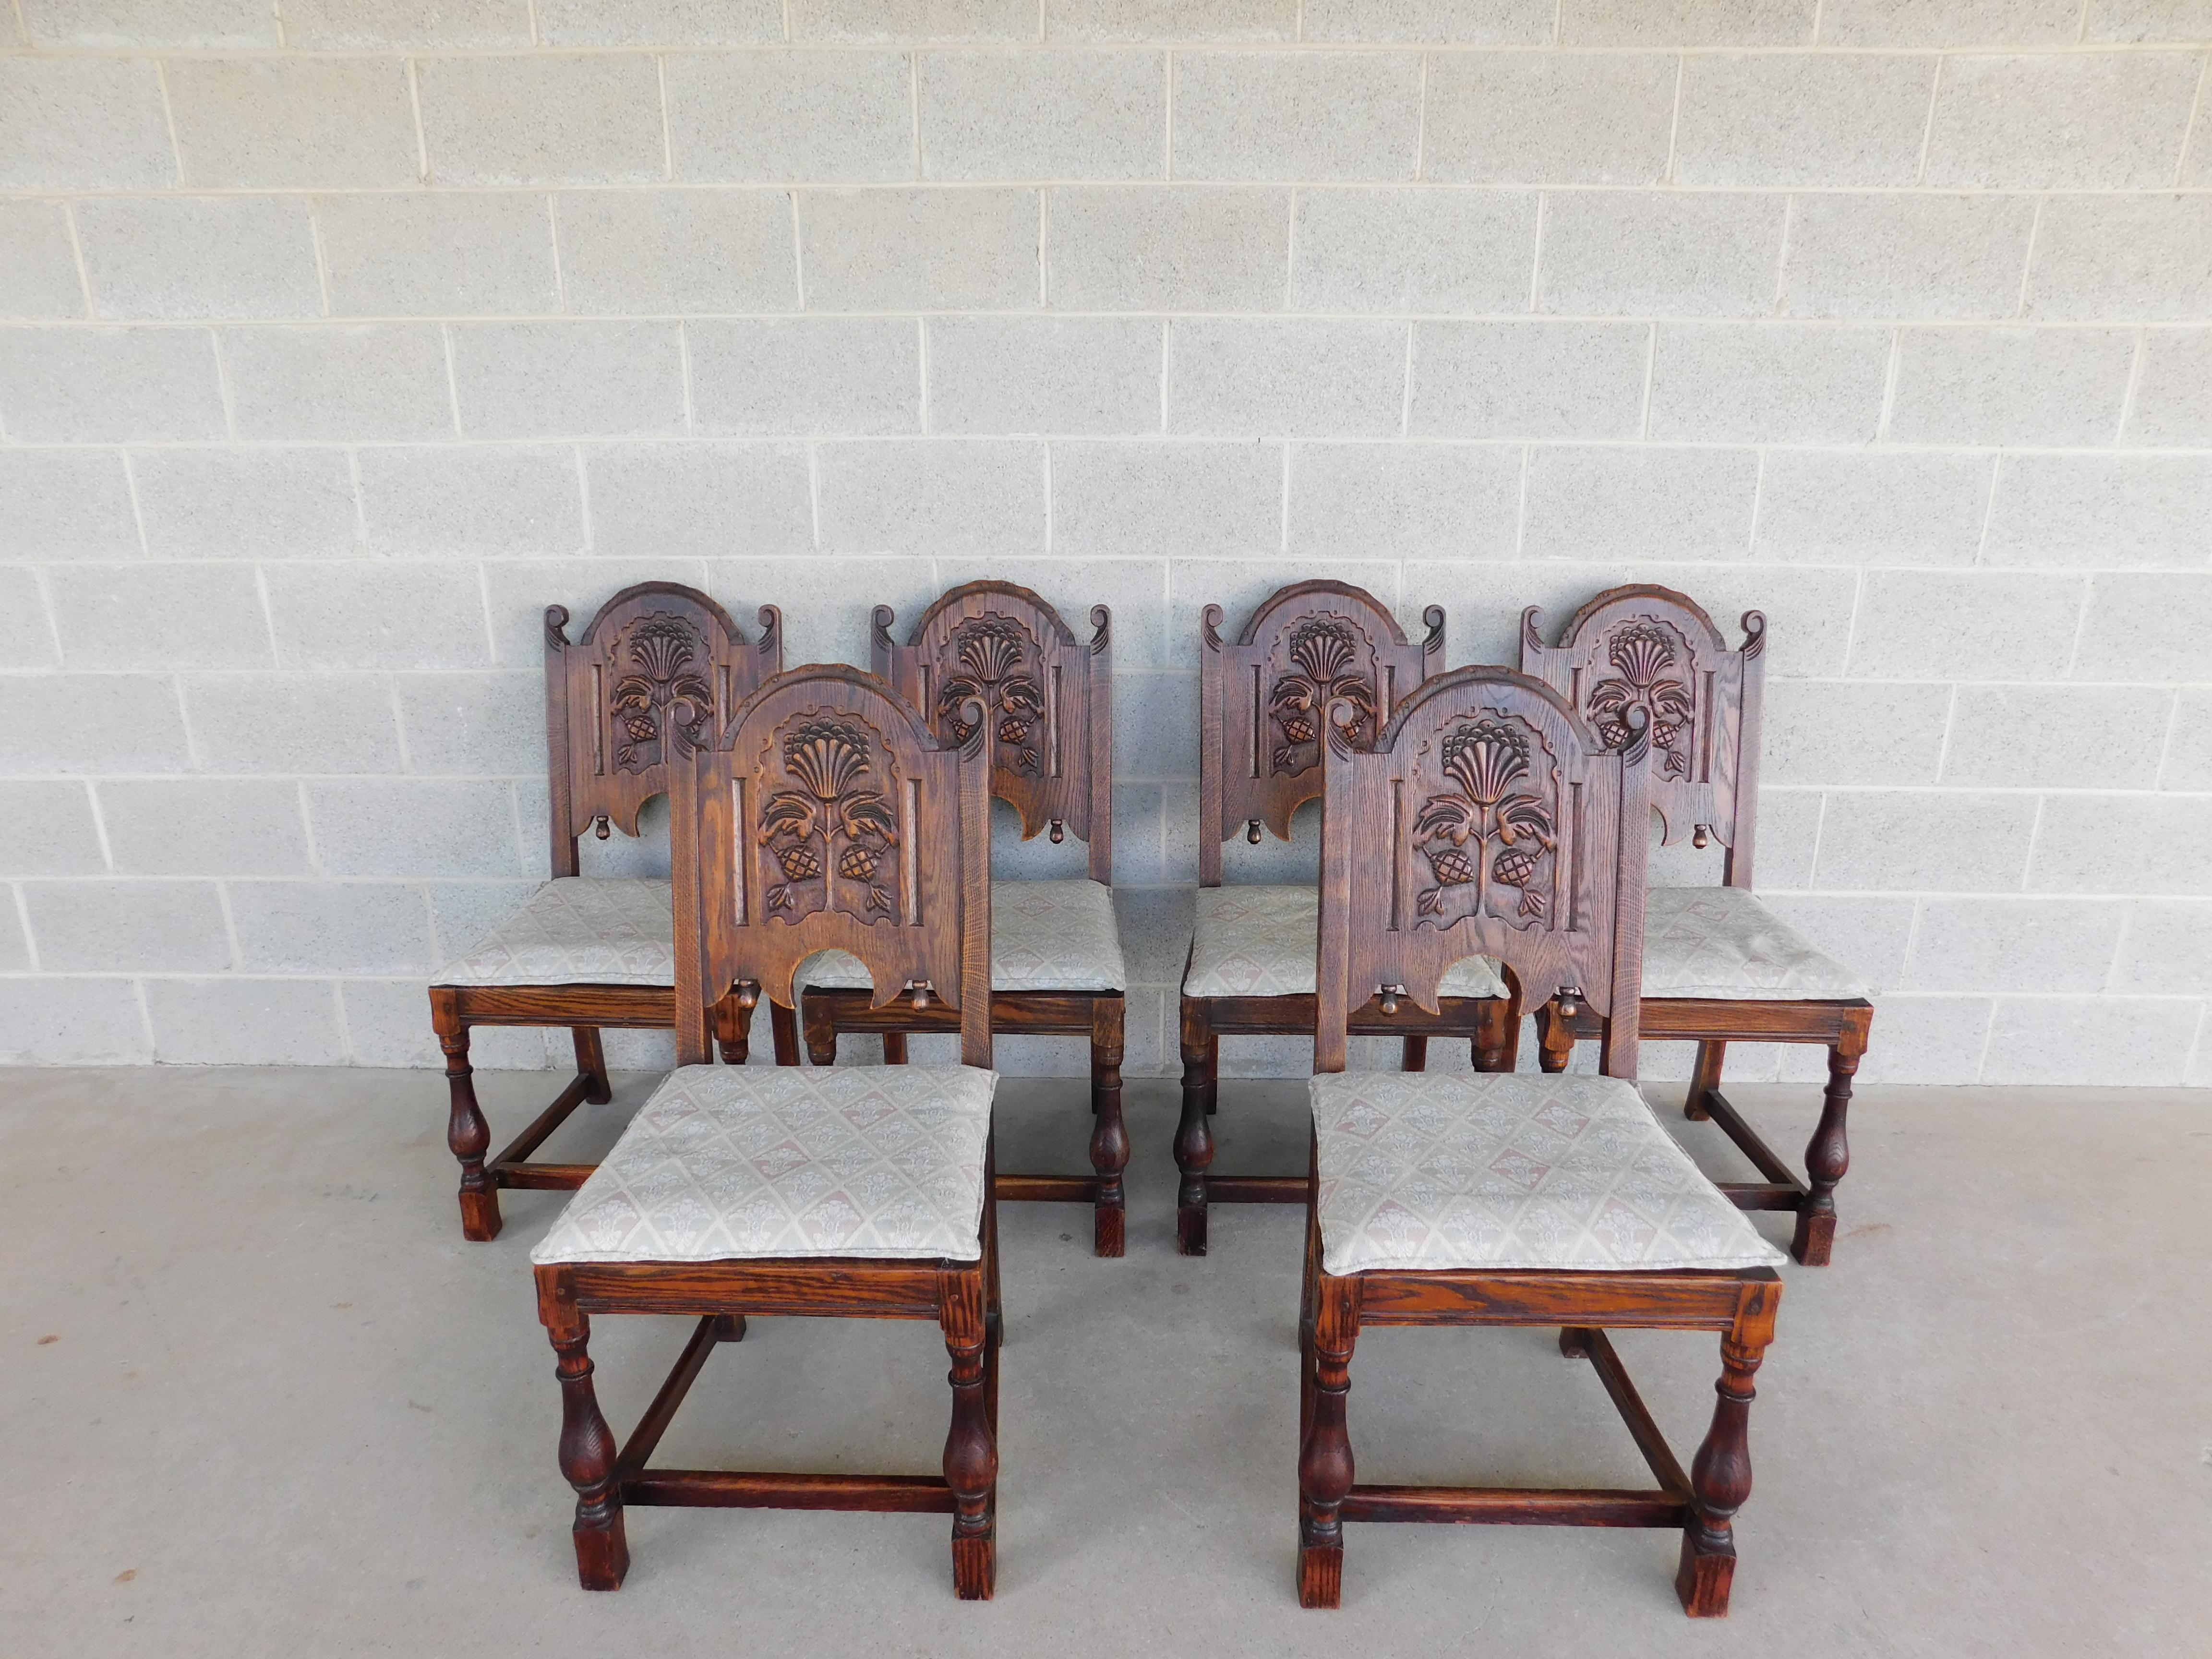 Set of 6 Side Chairs, Solid Oak Stretcher Base with Turned Legs, Flemished Carved Backrest. Upholstery is updated approx 30 years old in clean condition. 
Back Height 38.5